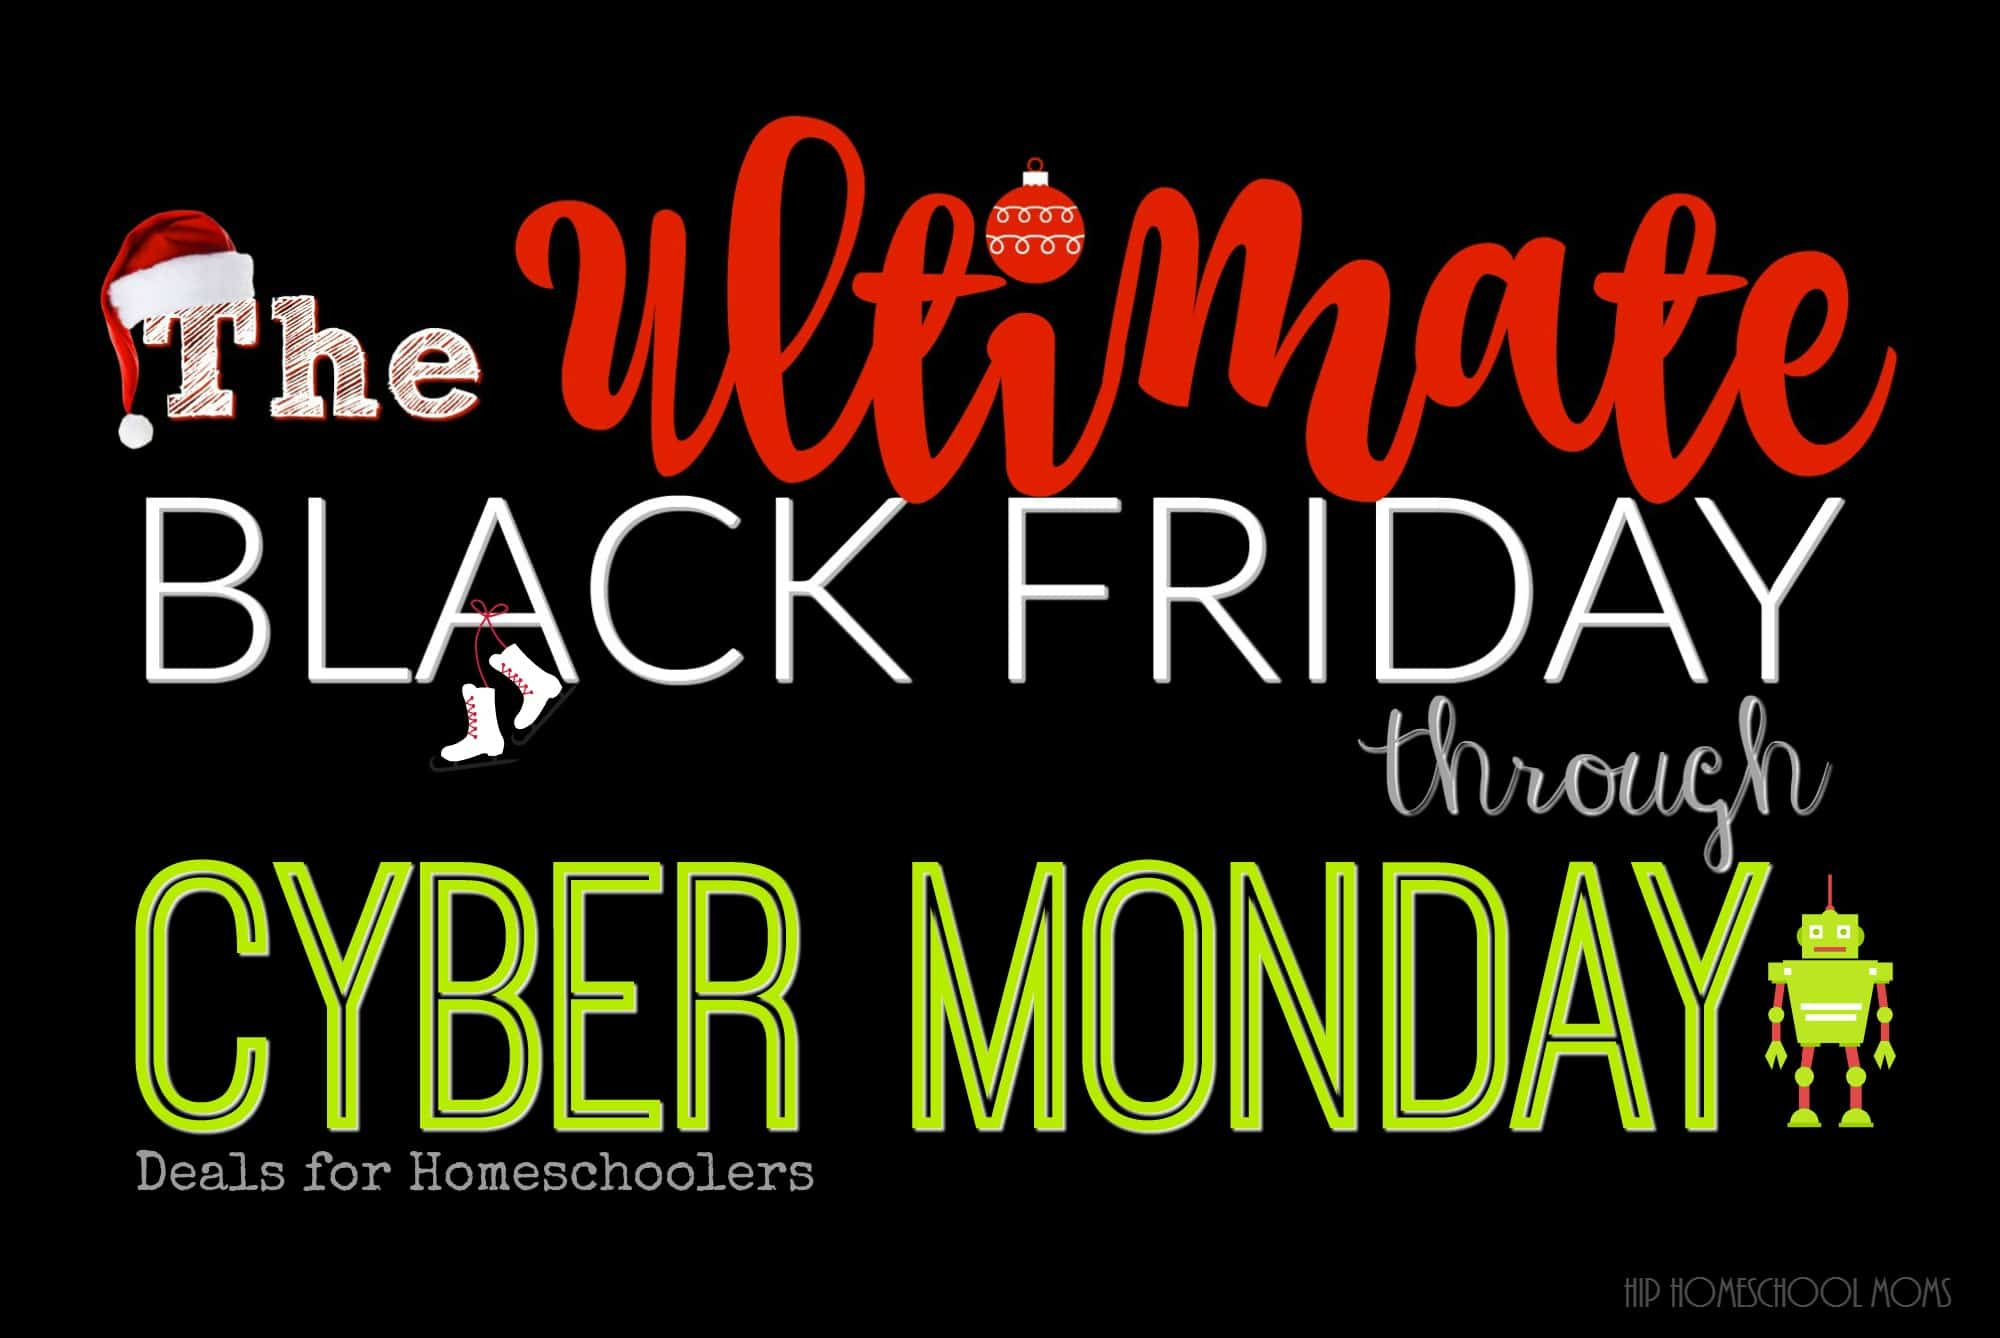 The ULTIMATE Black Friday through Cyber Monday Deals Guide for Homeschoolers - Hip Homeschool Moms